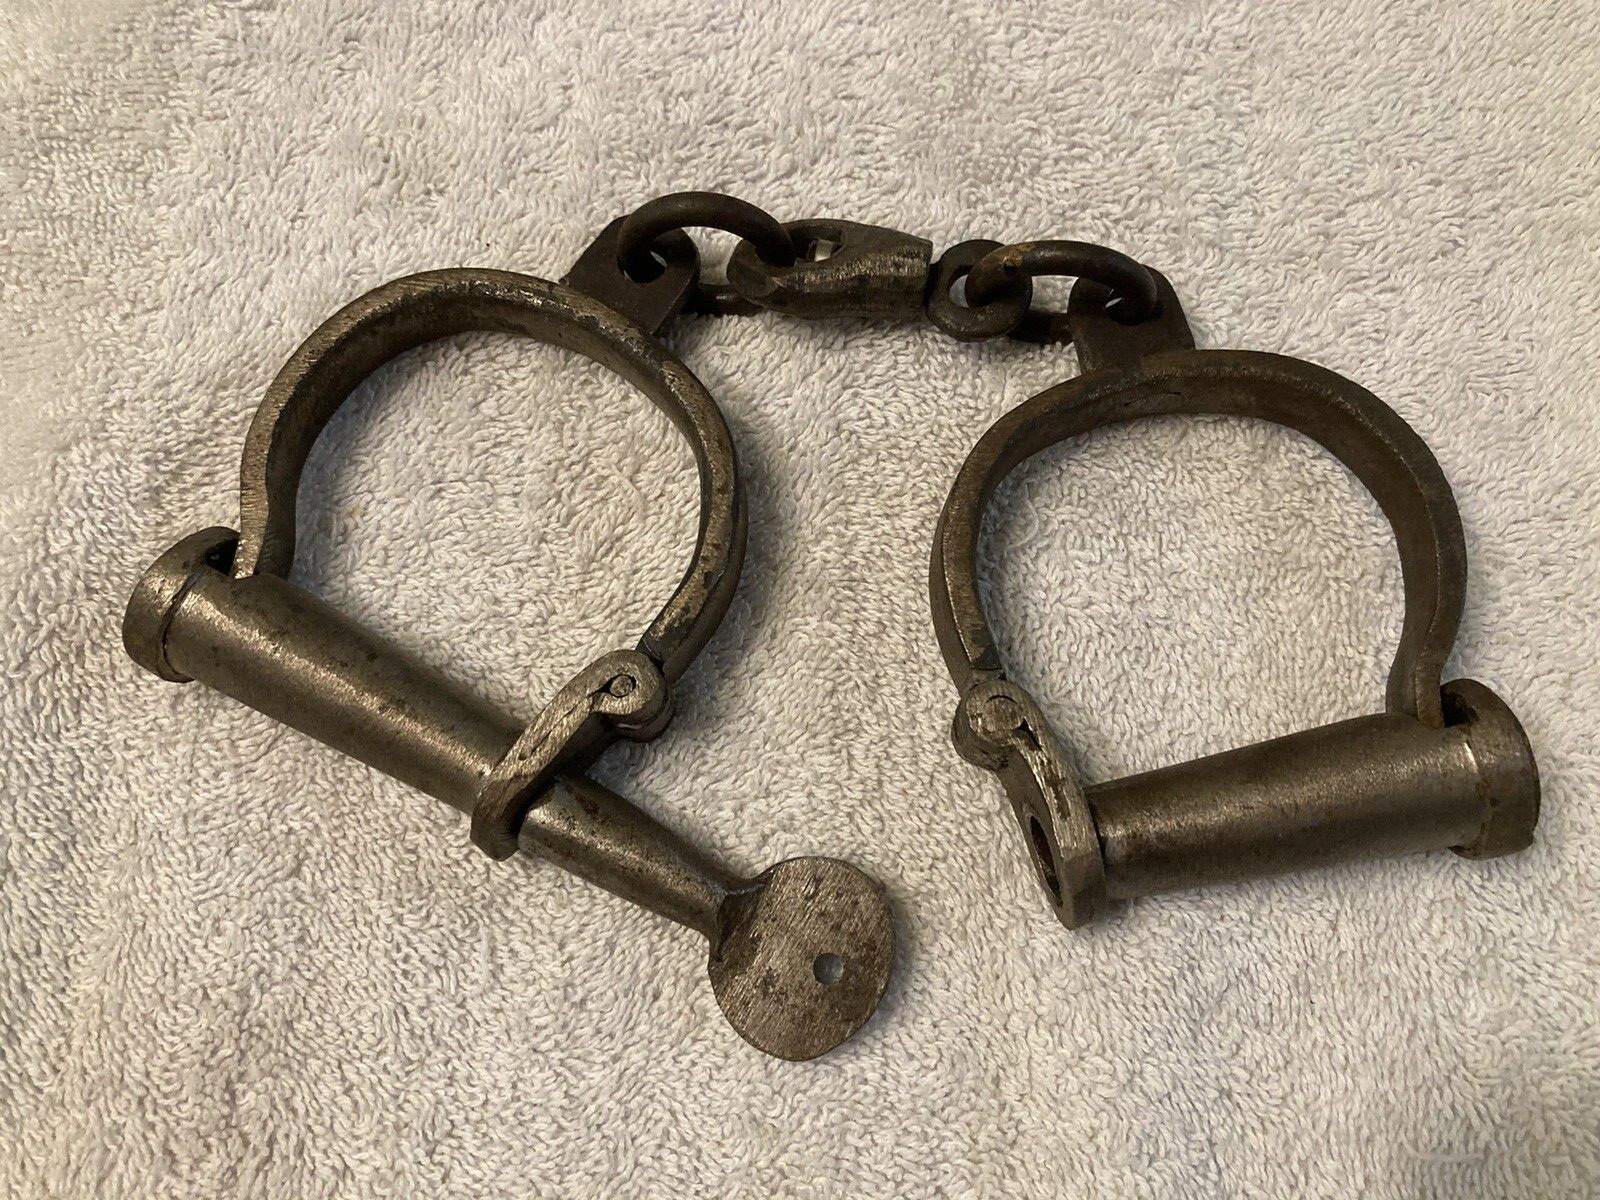 Antique Iron Shackles Handcuffs with Key, Cuffs Work, Threads on Key Bad.